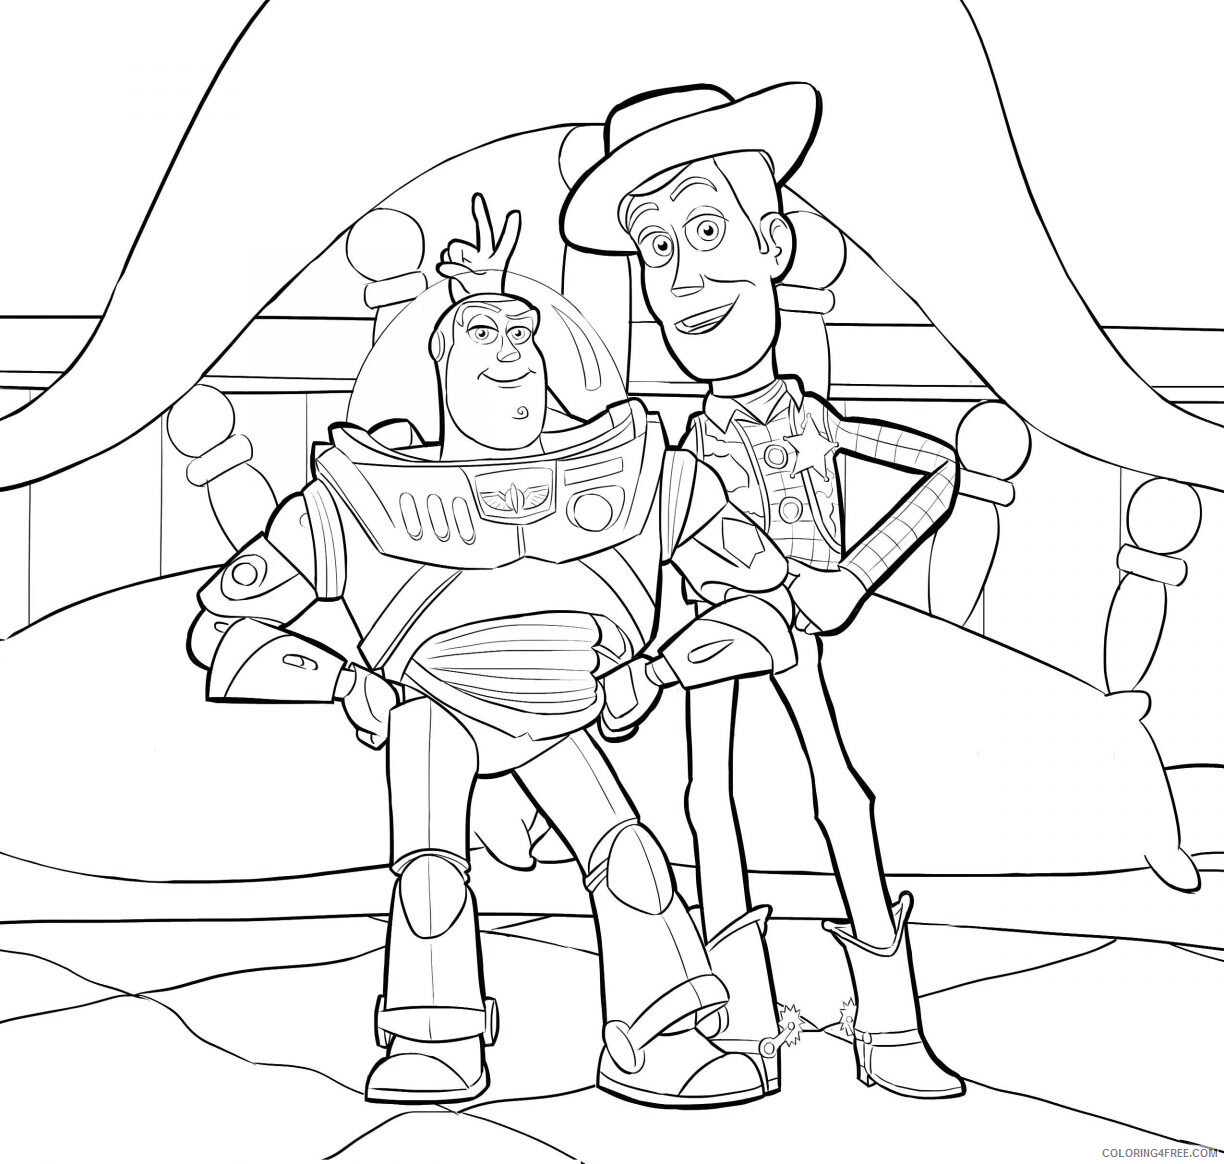 Toy Story Coloring Pages TV Film Funny Toy Story 4 Printable 2020 10362 Coloring4free